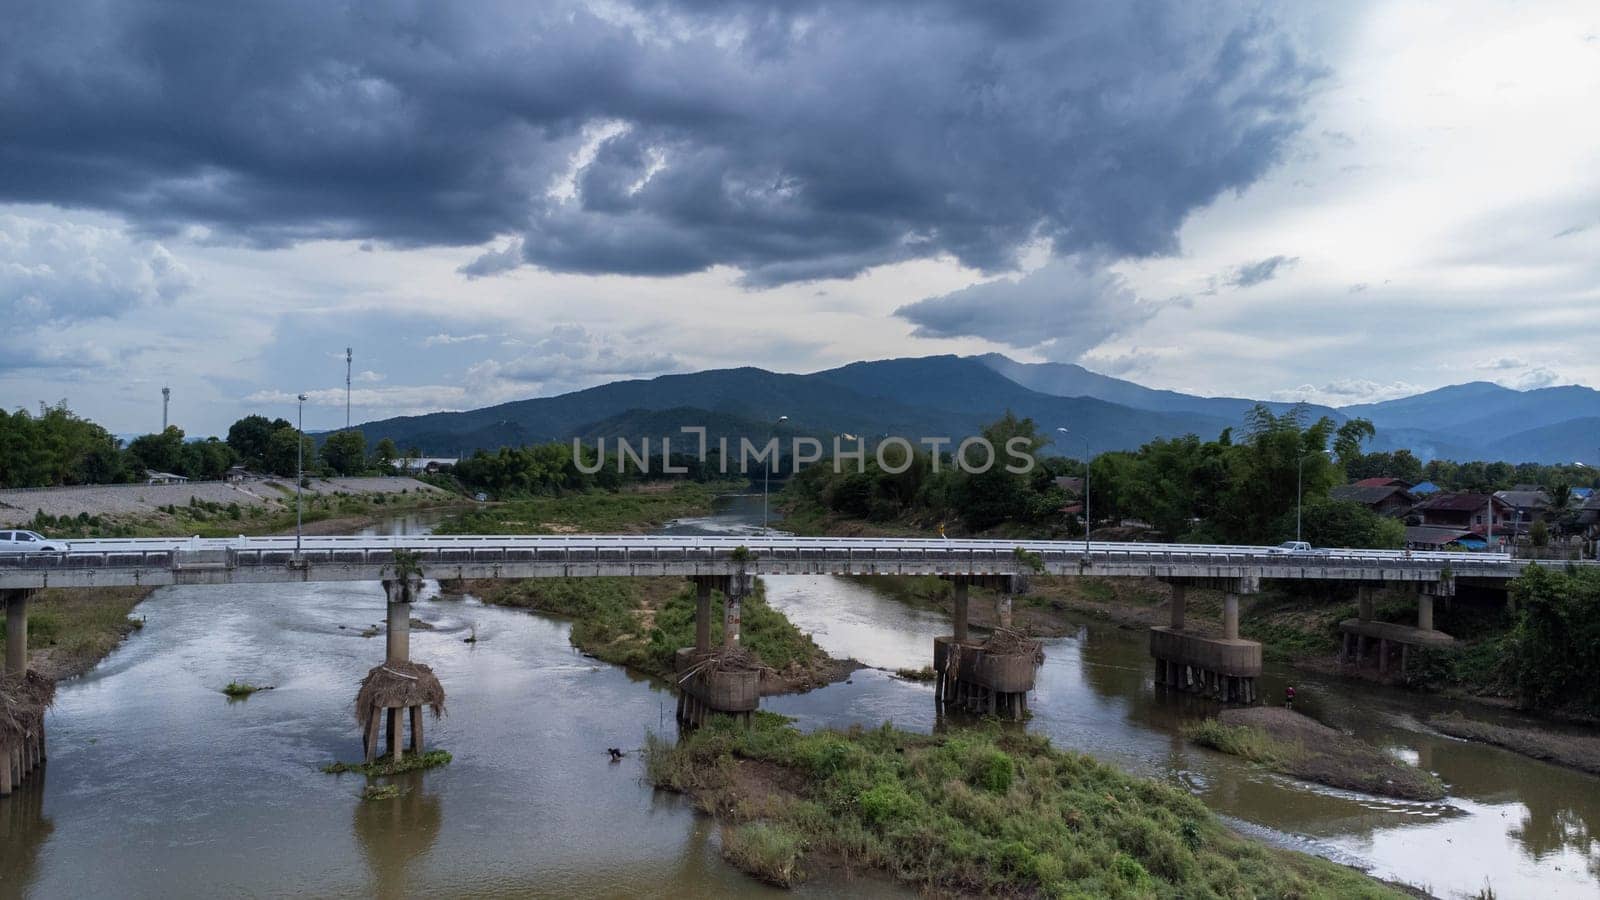 Chiang Mai (Thailand), The Bridge over the Ping River. Aerial view of the traffic on the bridge over the river. by TEERASAK